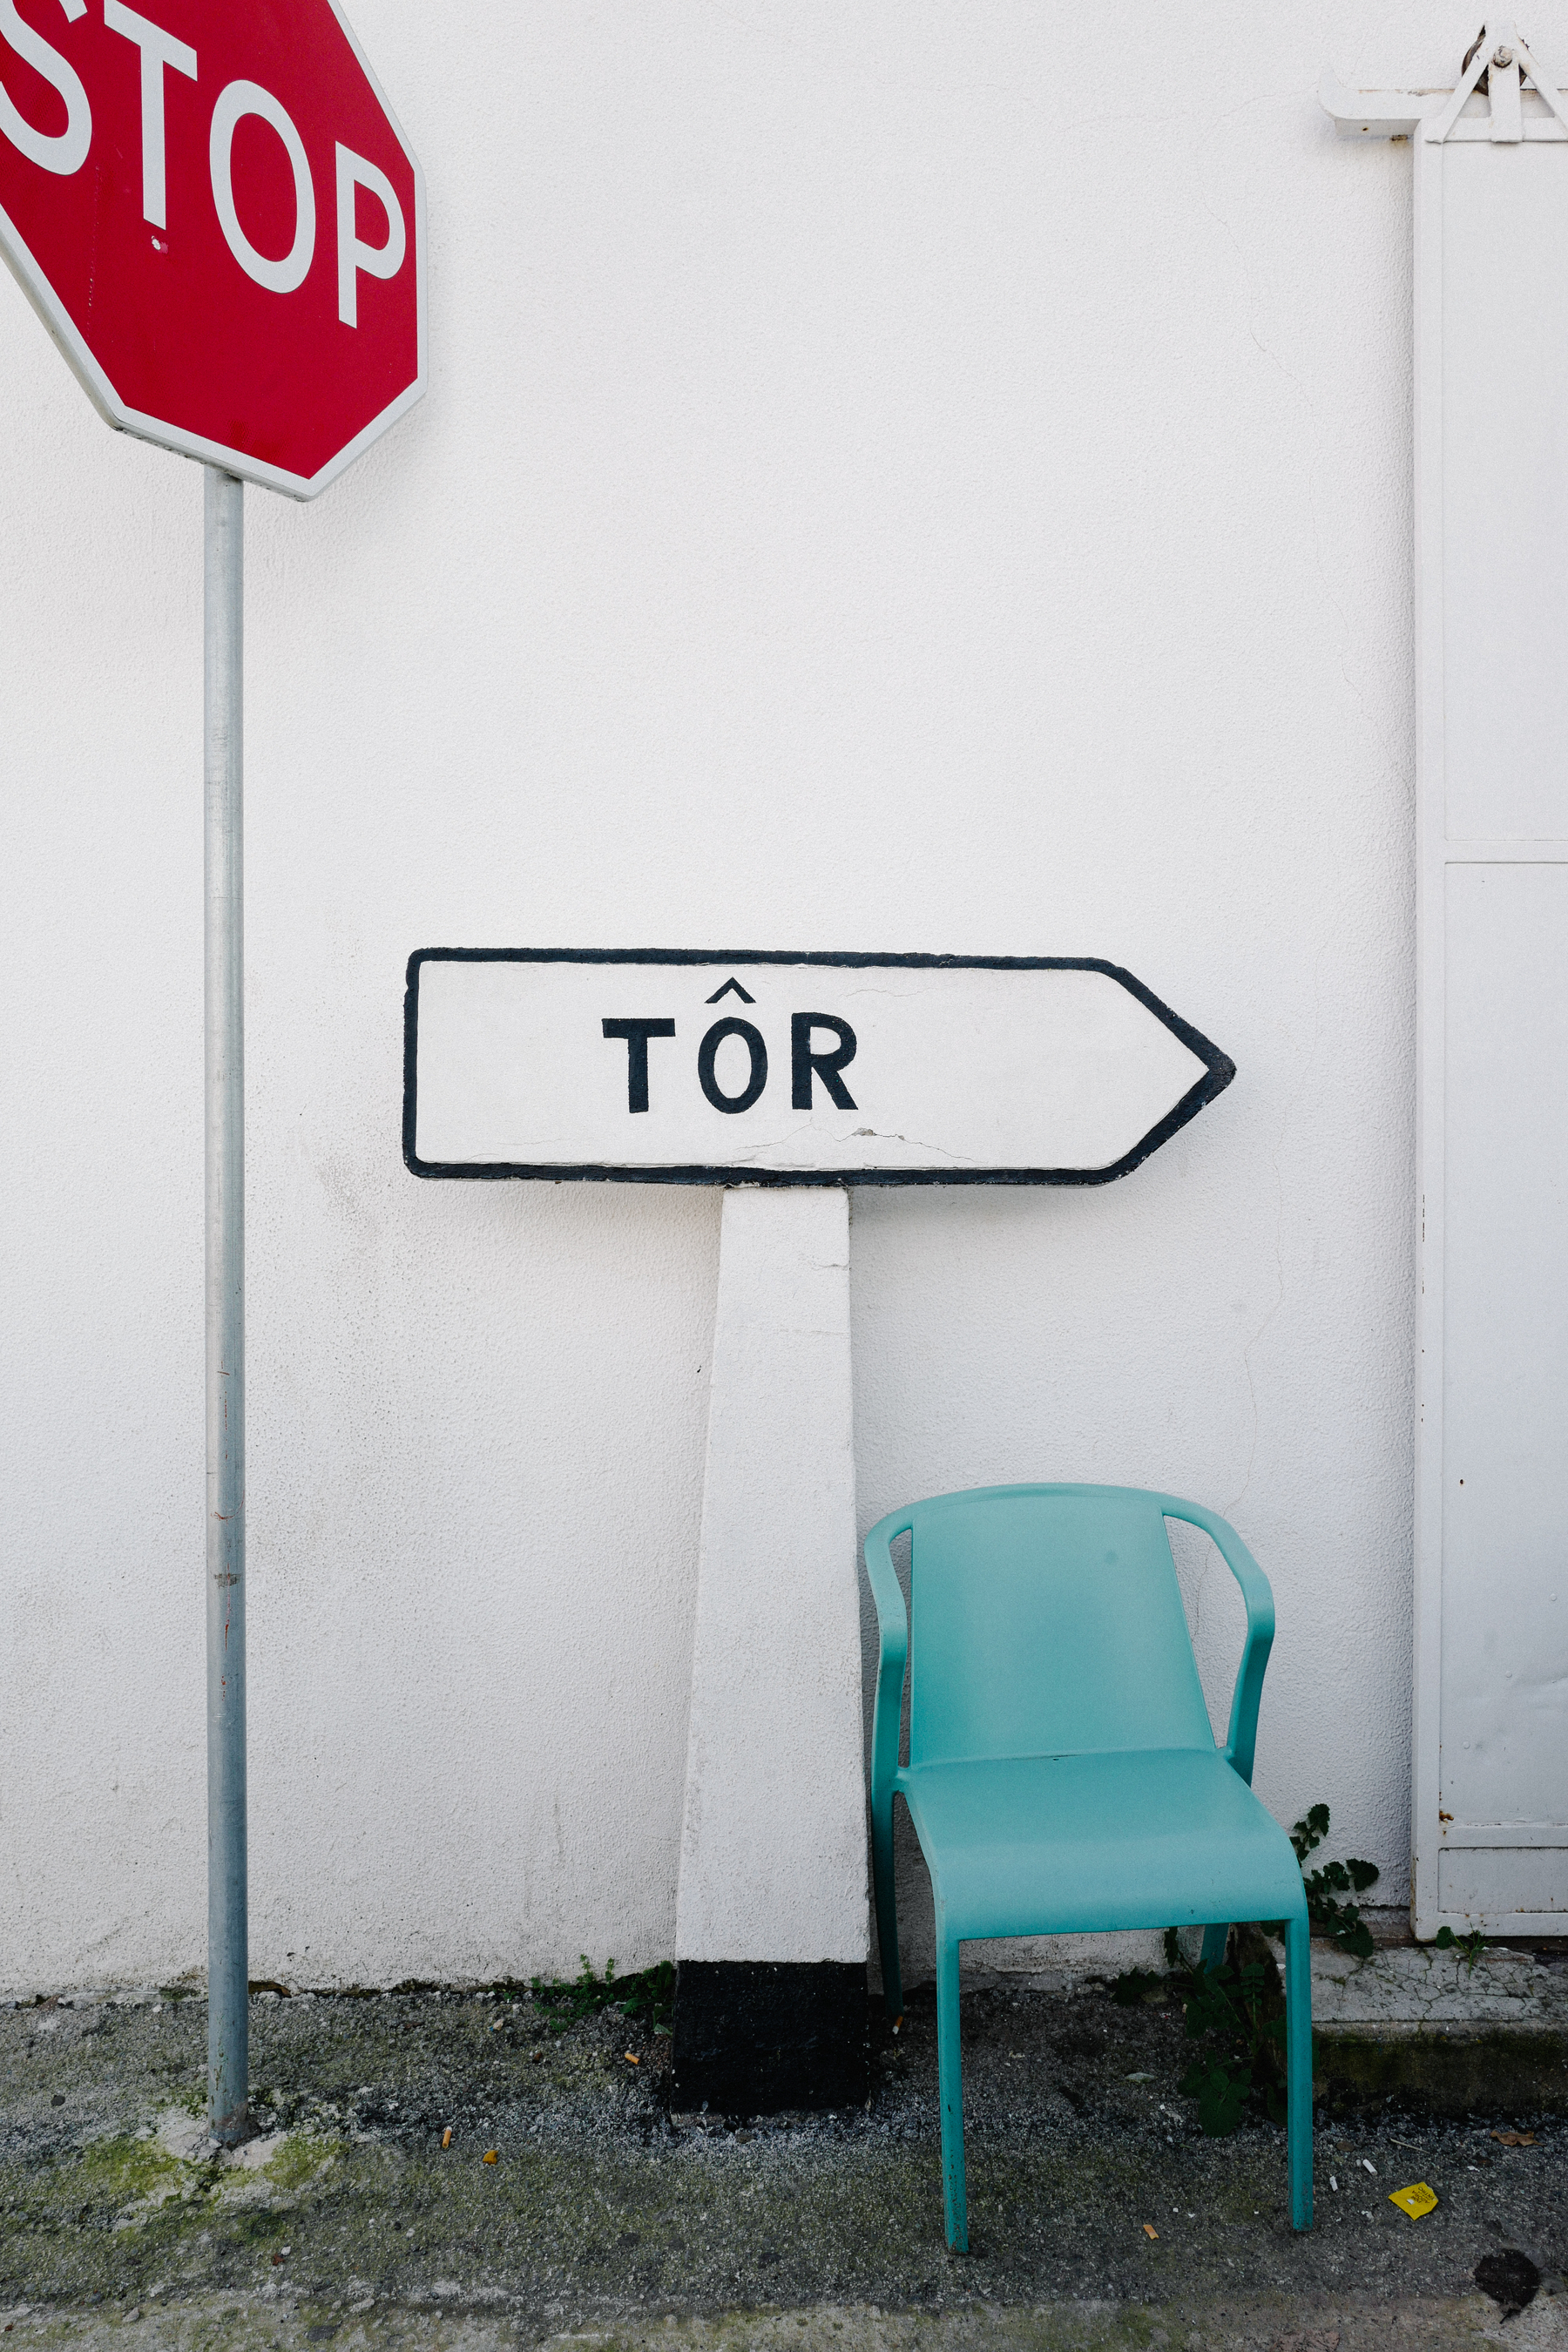 A stop sign, a directional arrow sign with the word "TÔR," and a single turquoise chair against a white wall.